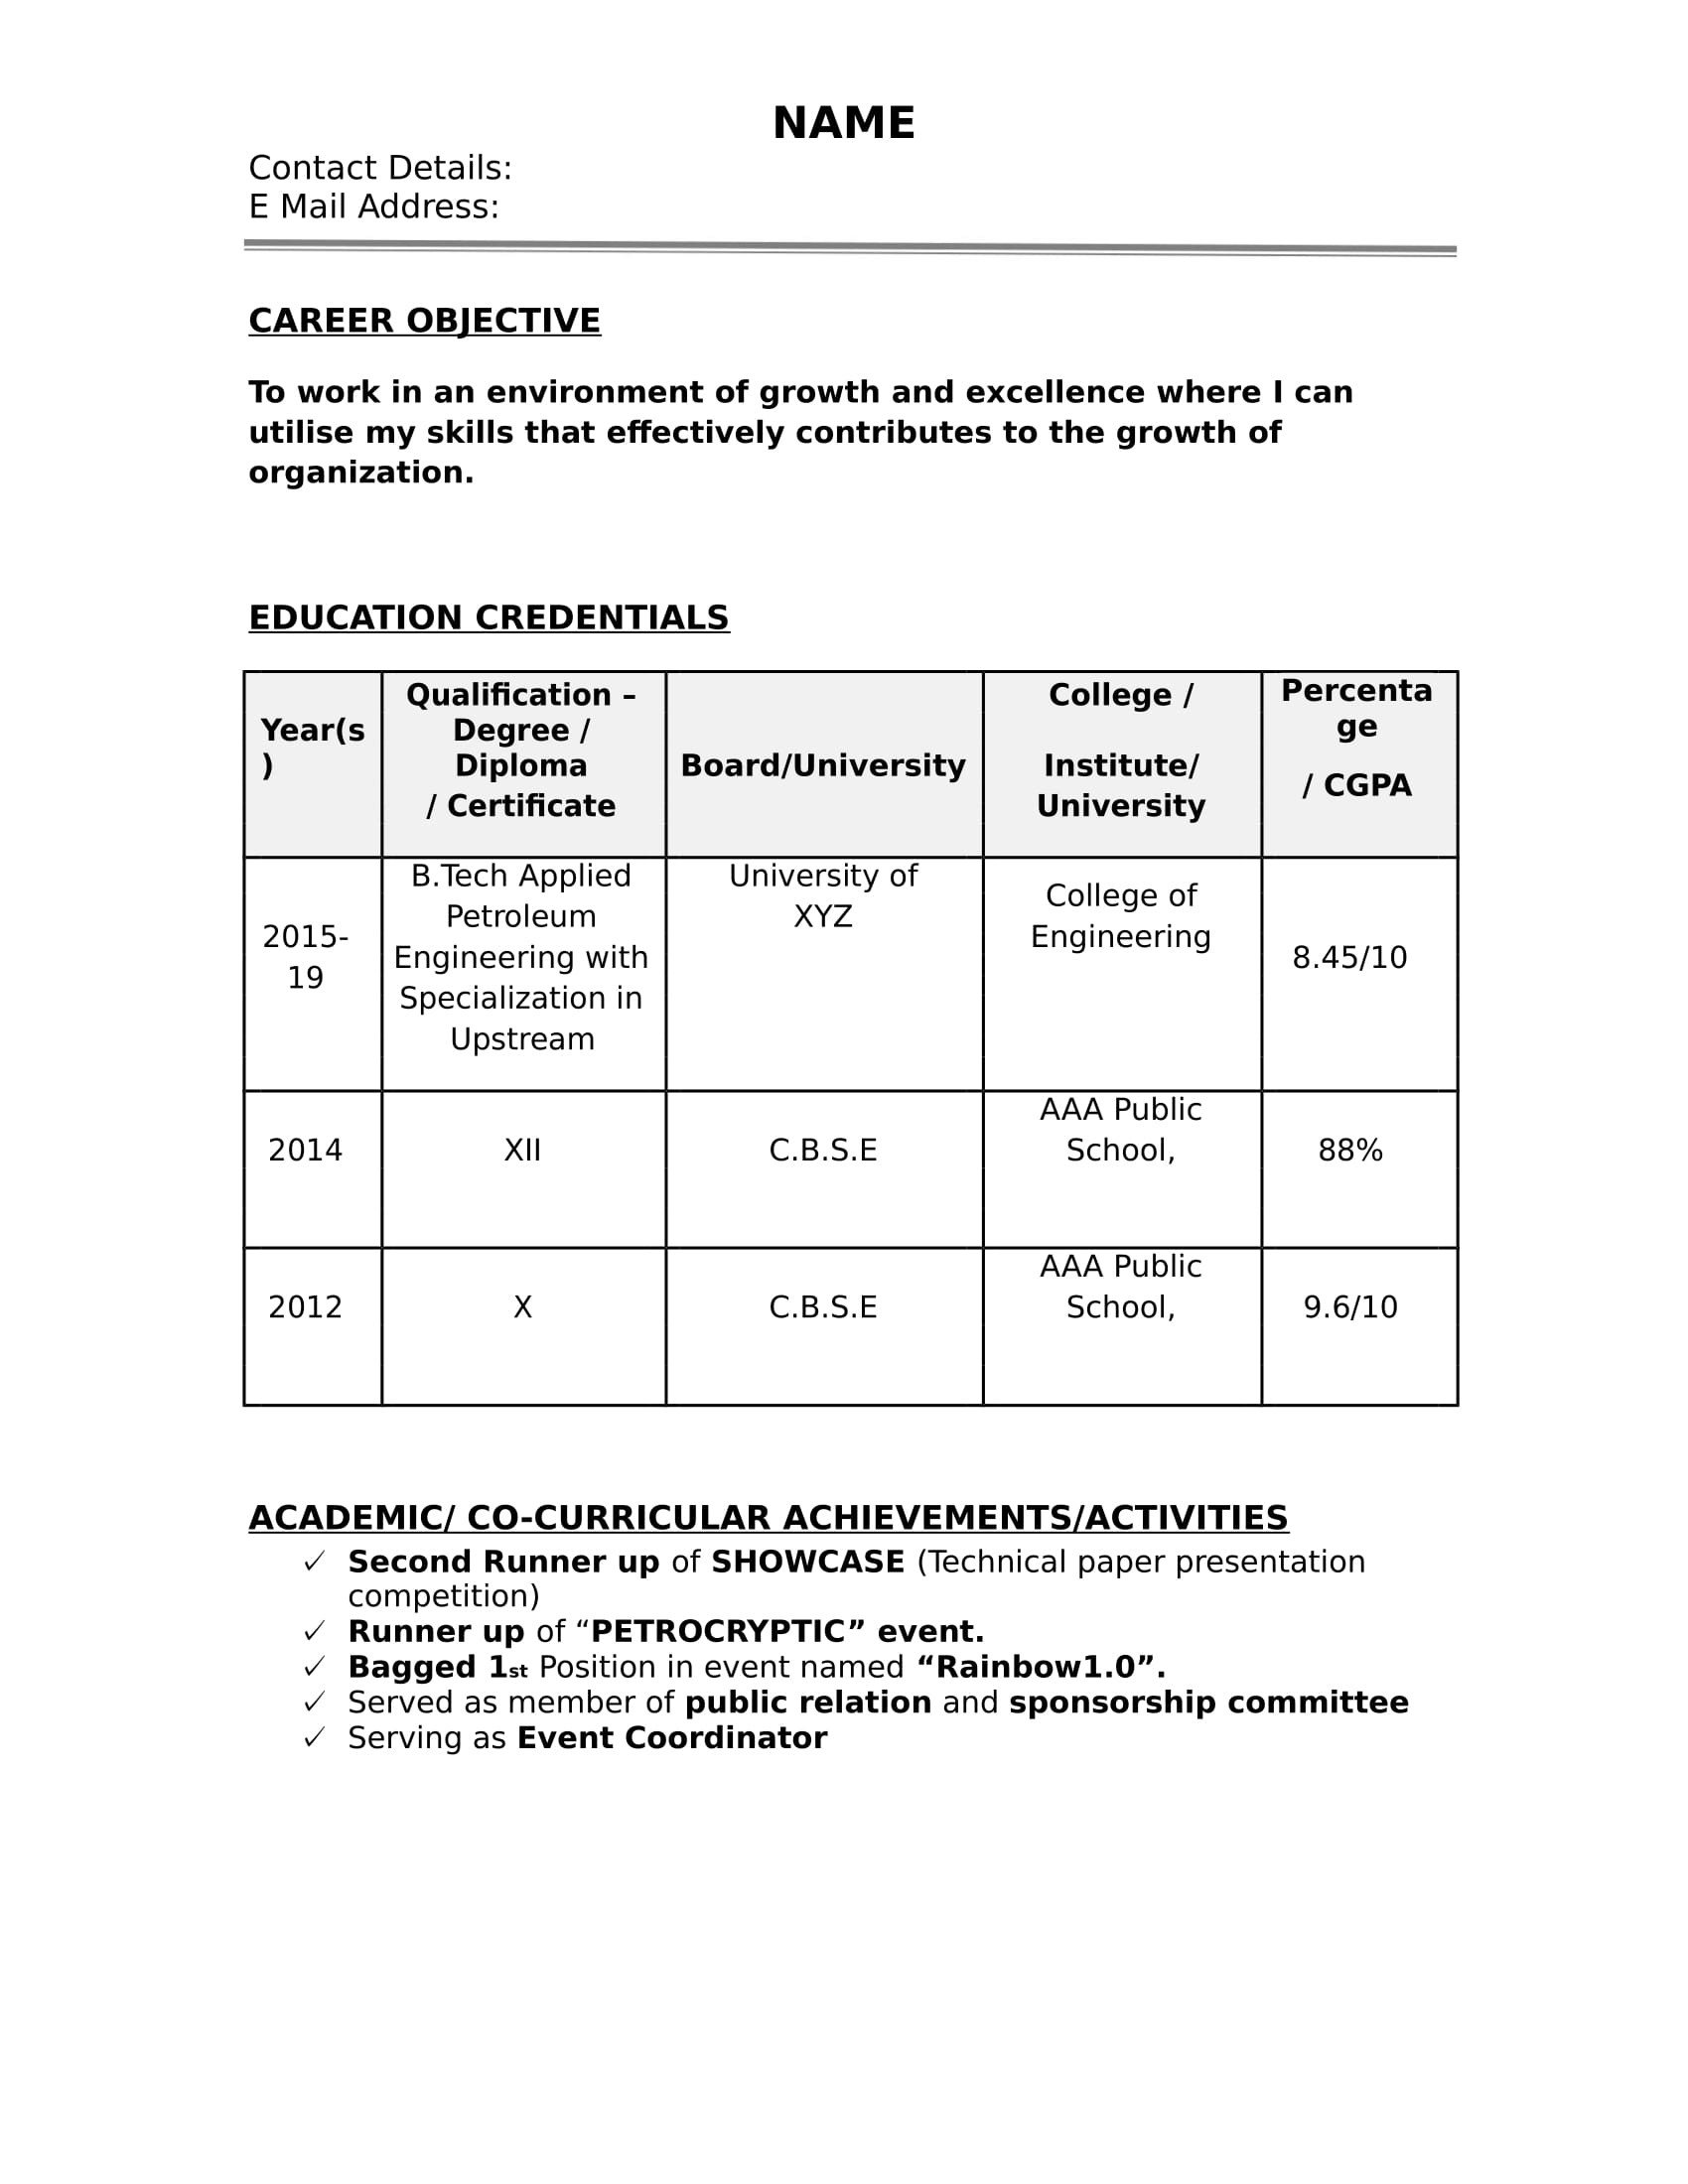 Resume Samples for Freshers 32 Resume Templates for Freshers Download Free Word format